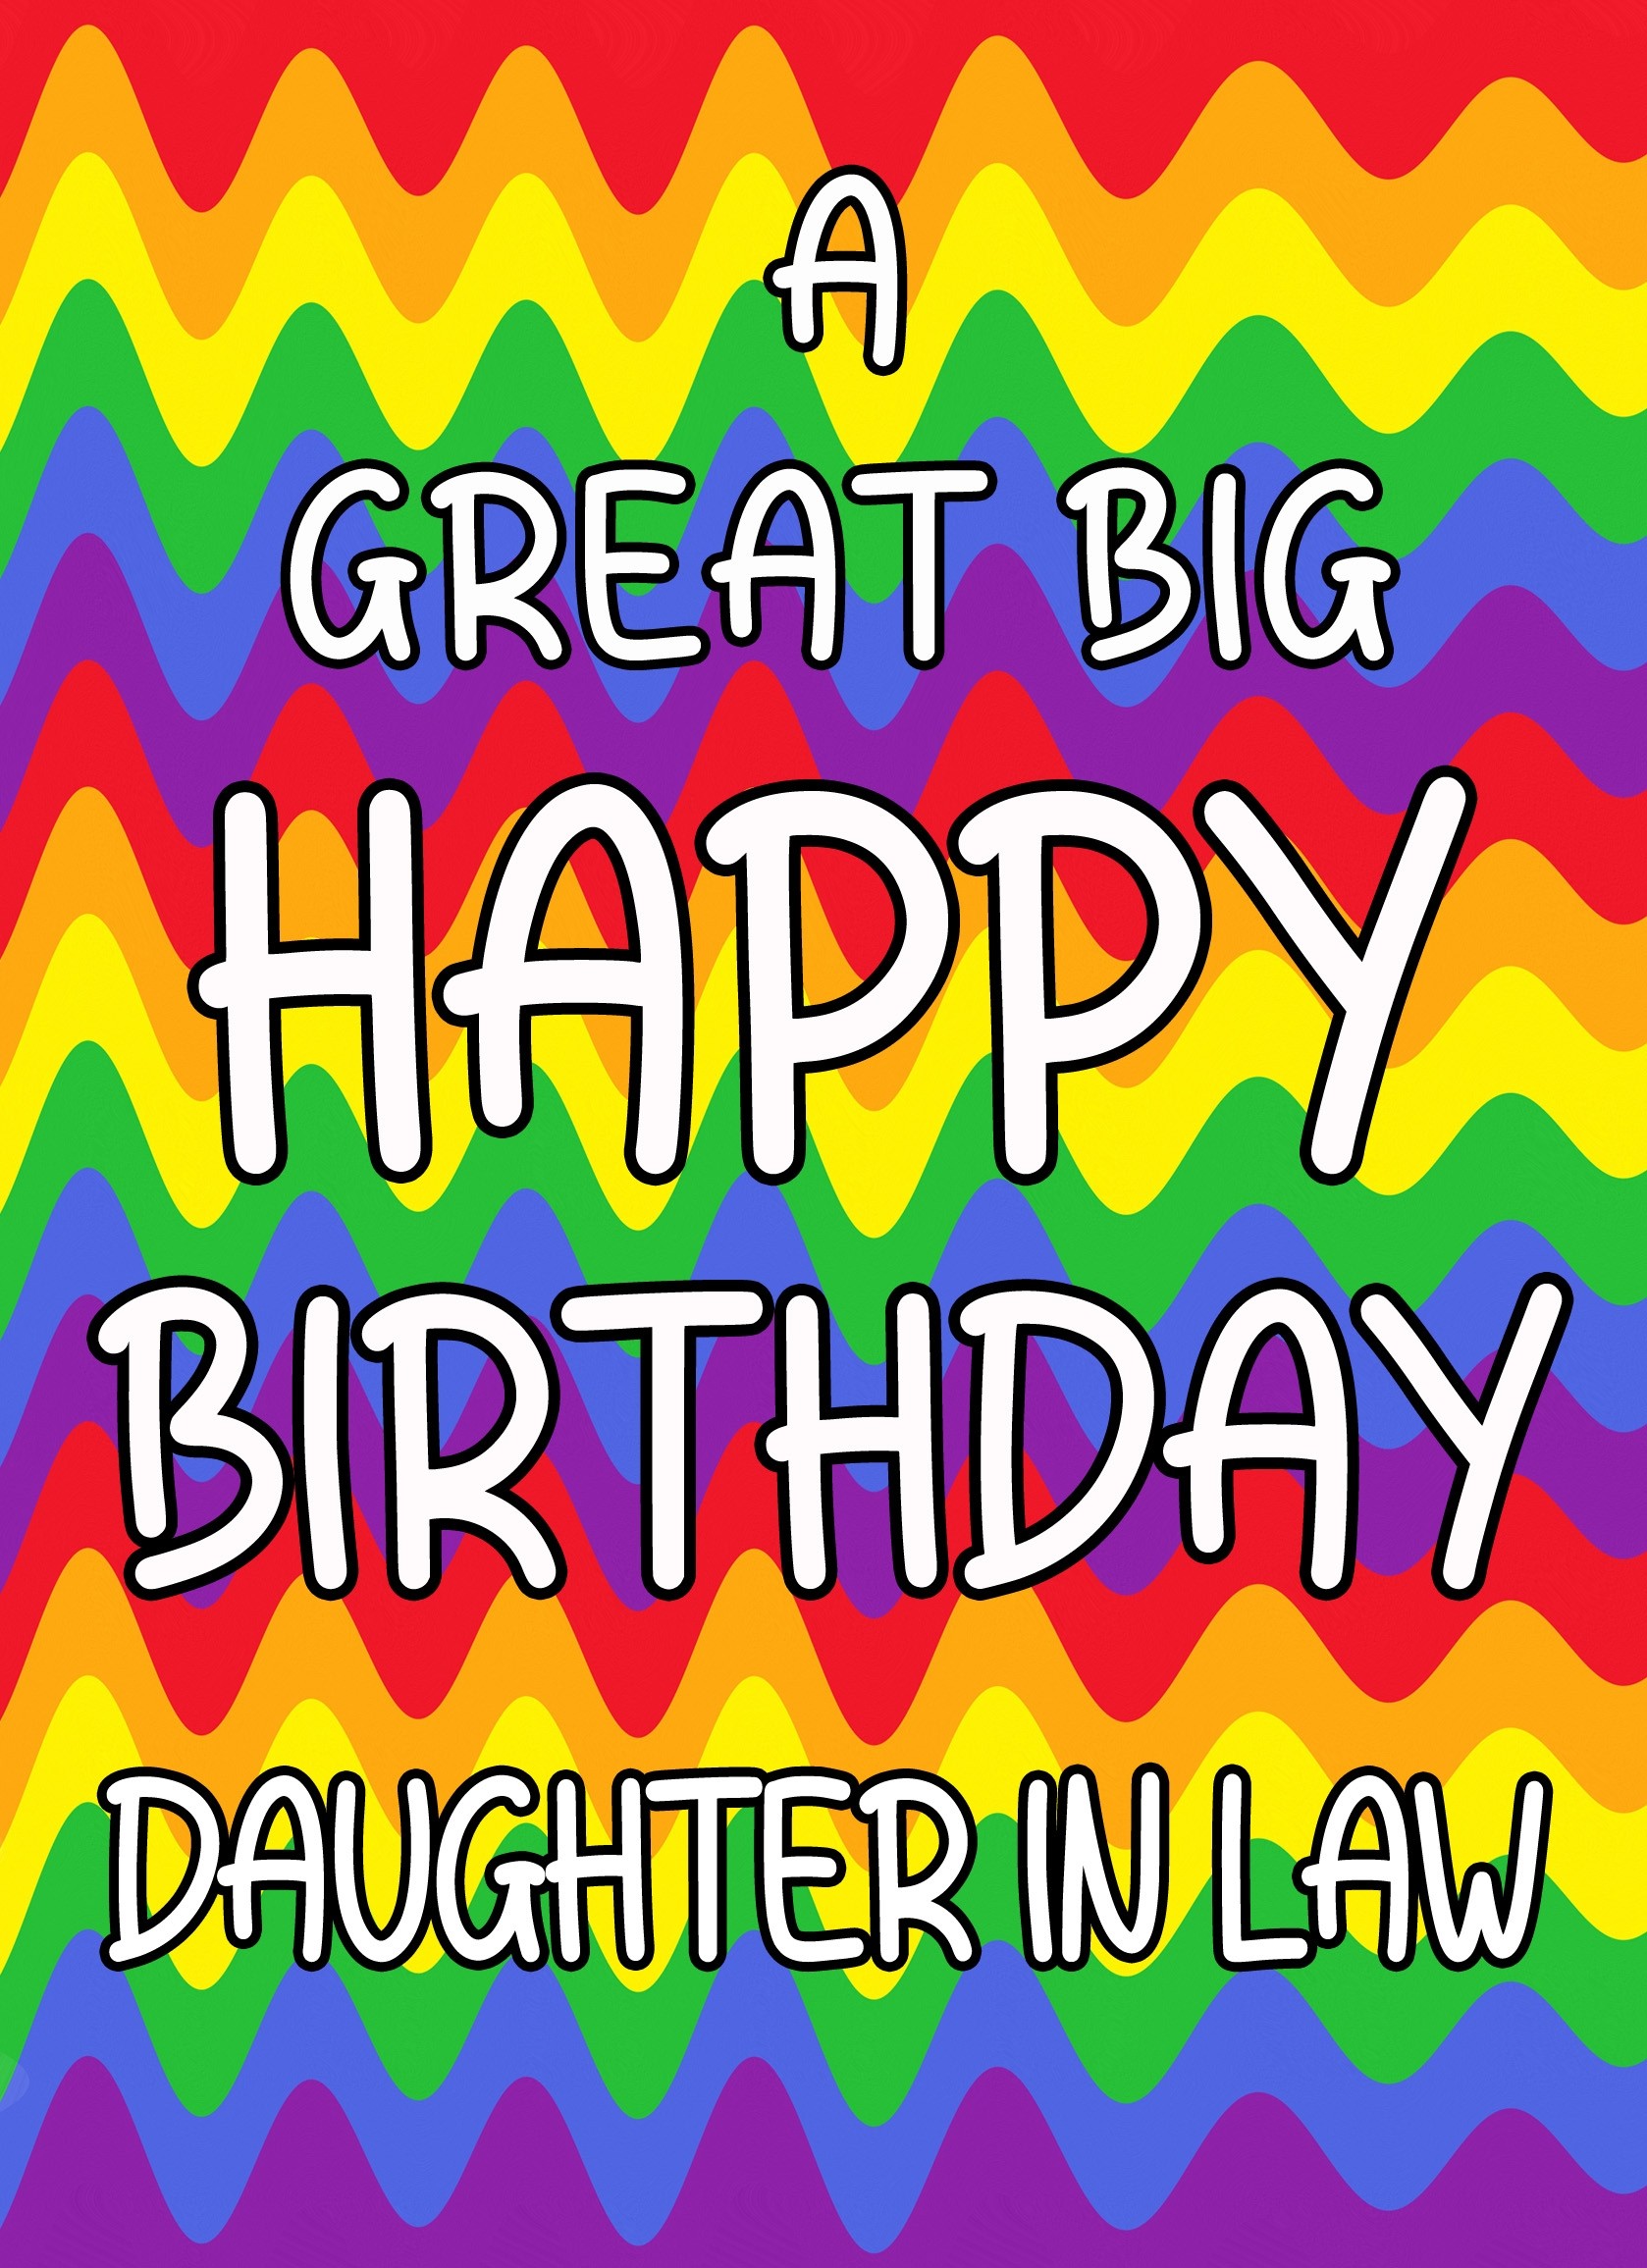 Happy Birthday 'Daughter in Law' Greeting Card (Rainbow)